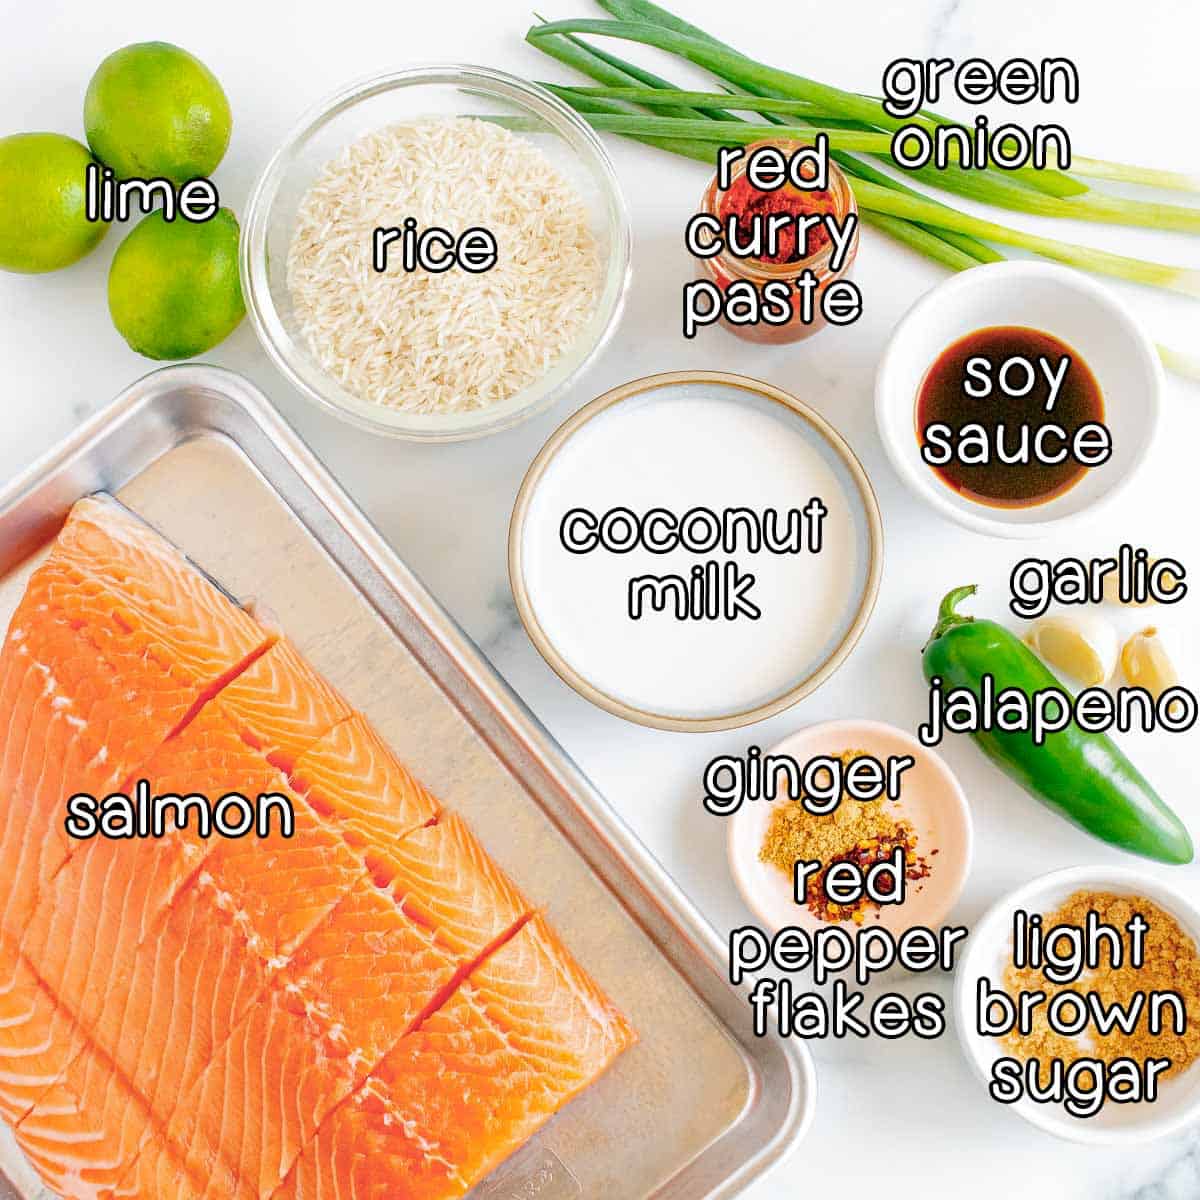 Overhead shot of ingredients - lime, rice, red curry paste, green onion, soy sauce, coconut milk, garlic, jalapeno, light brown sugar, ginger, red pepper flakes, and salmon.